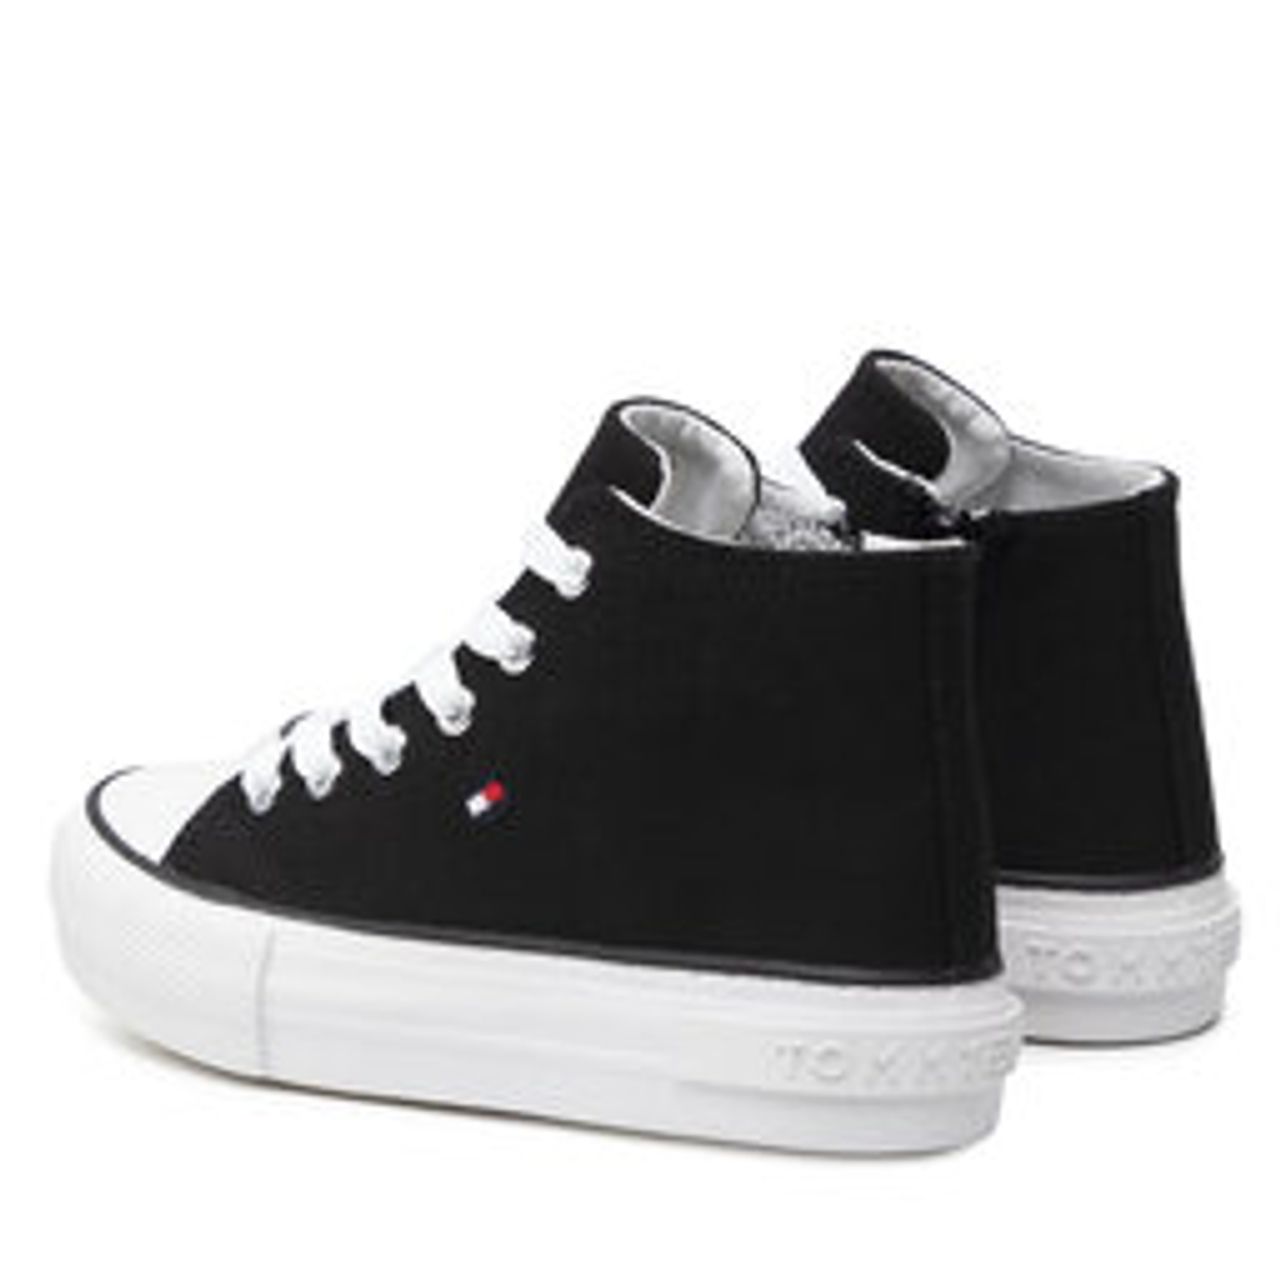 Sneakers aus Stoff Tommy Hilfiger High Top Lace-Up Sneaker T3A4-32119-0890 Black 999